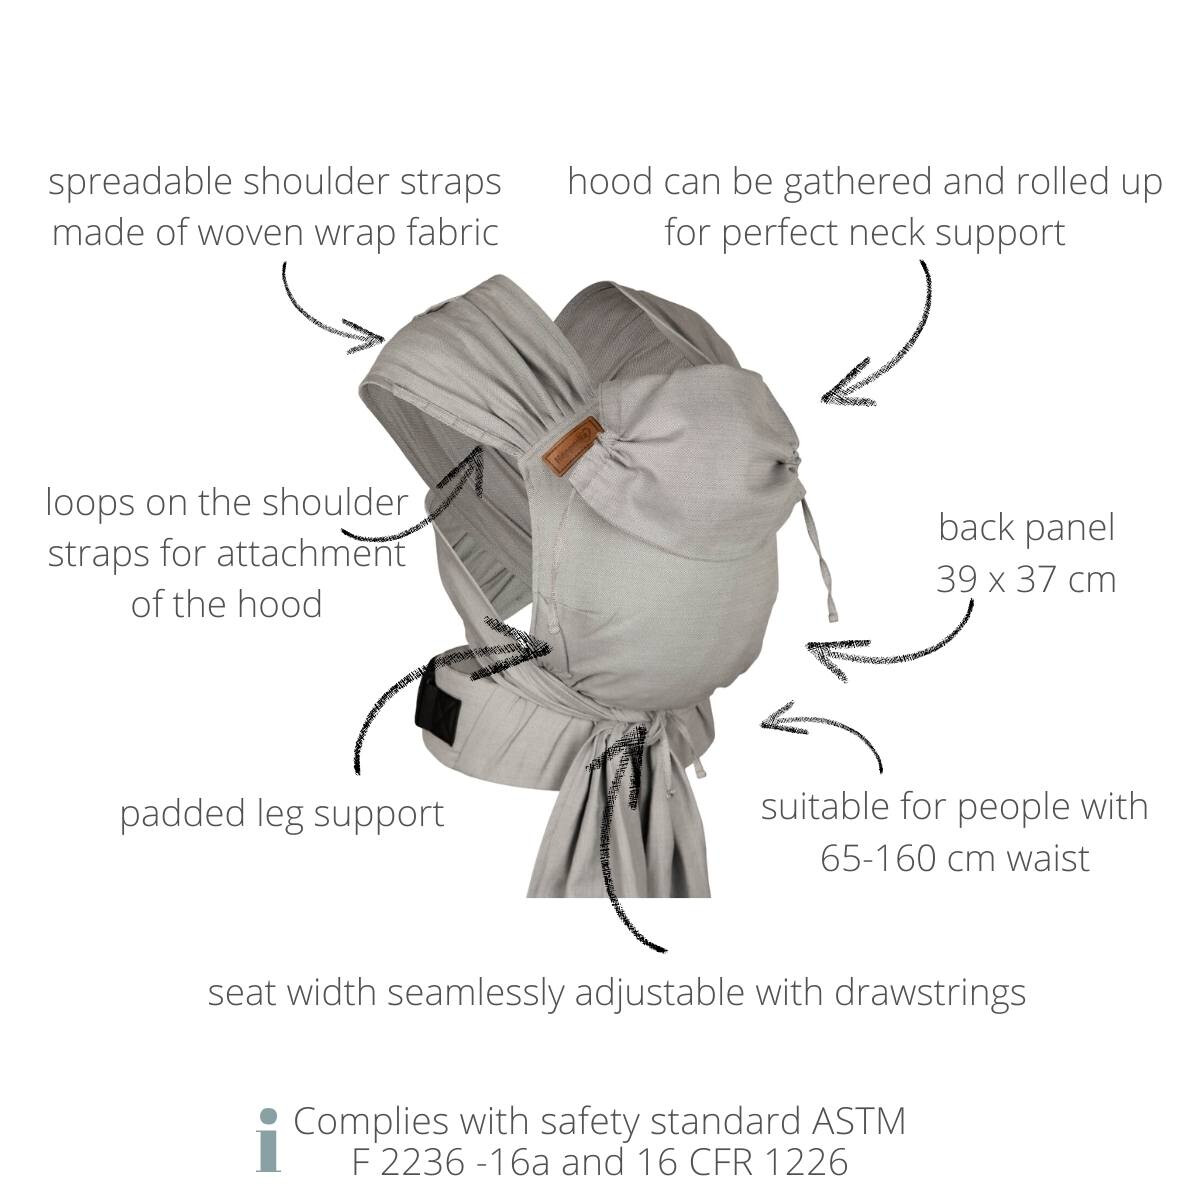 The features of the Hop-Tye Advanced baby carrier